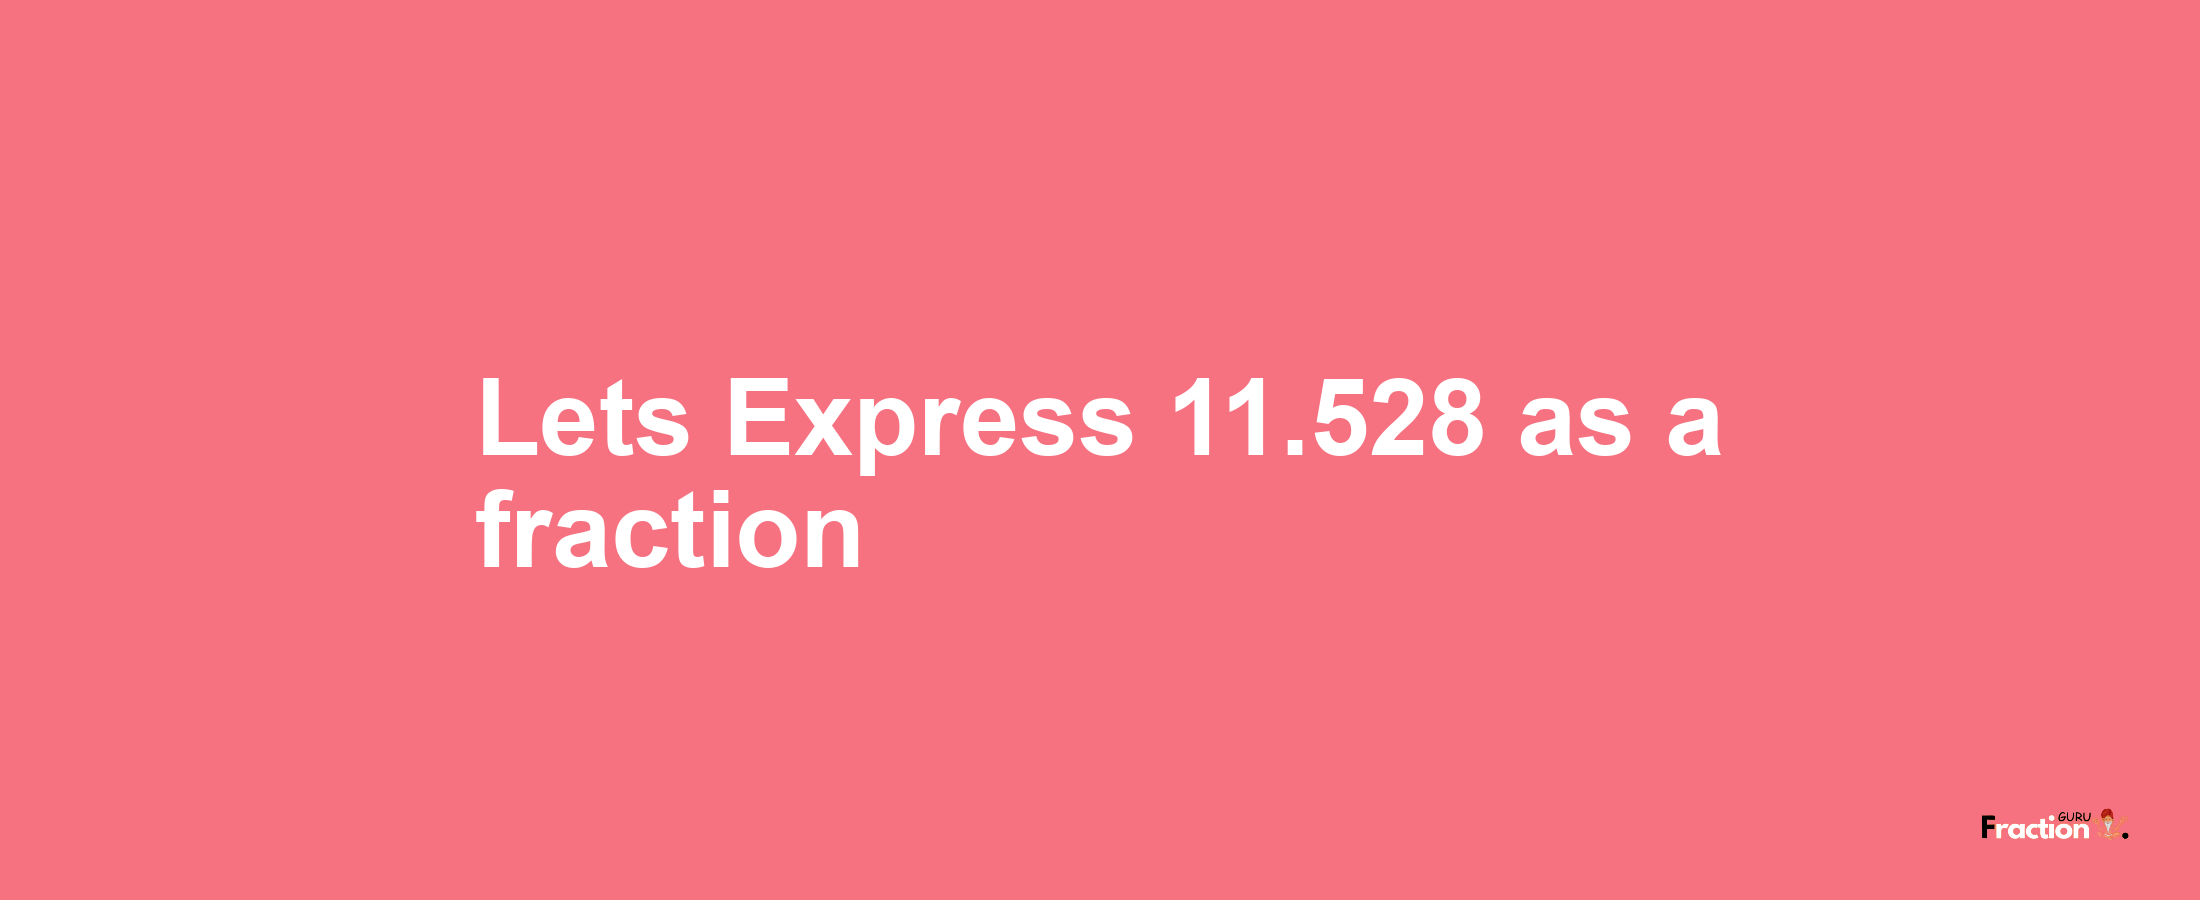 Lets Express 11.528 as afraction